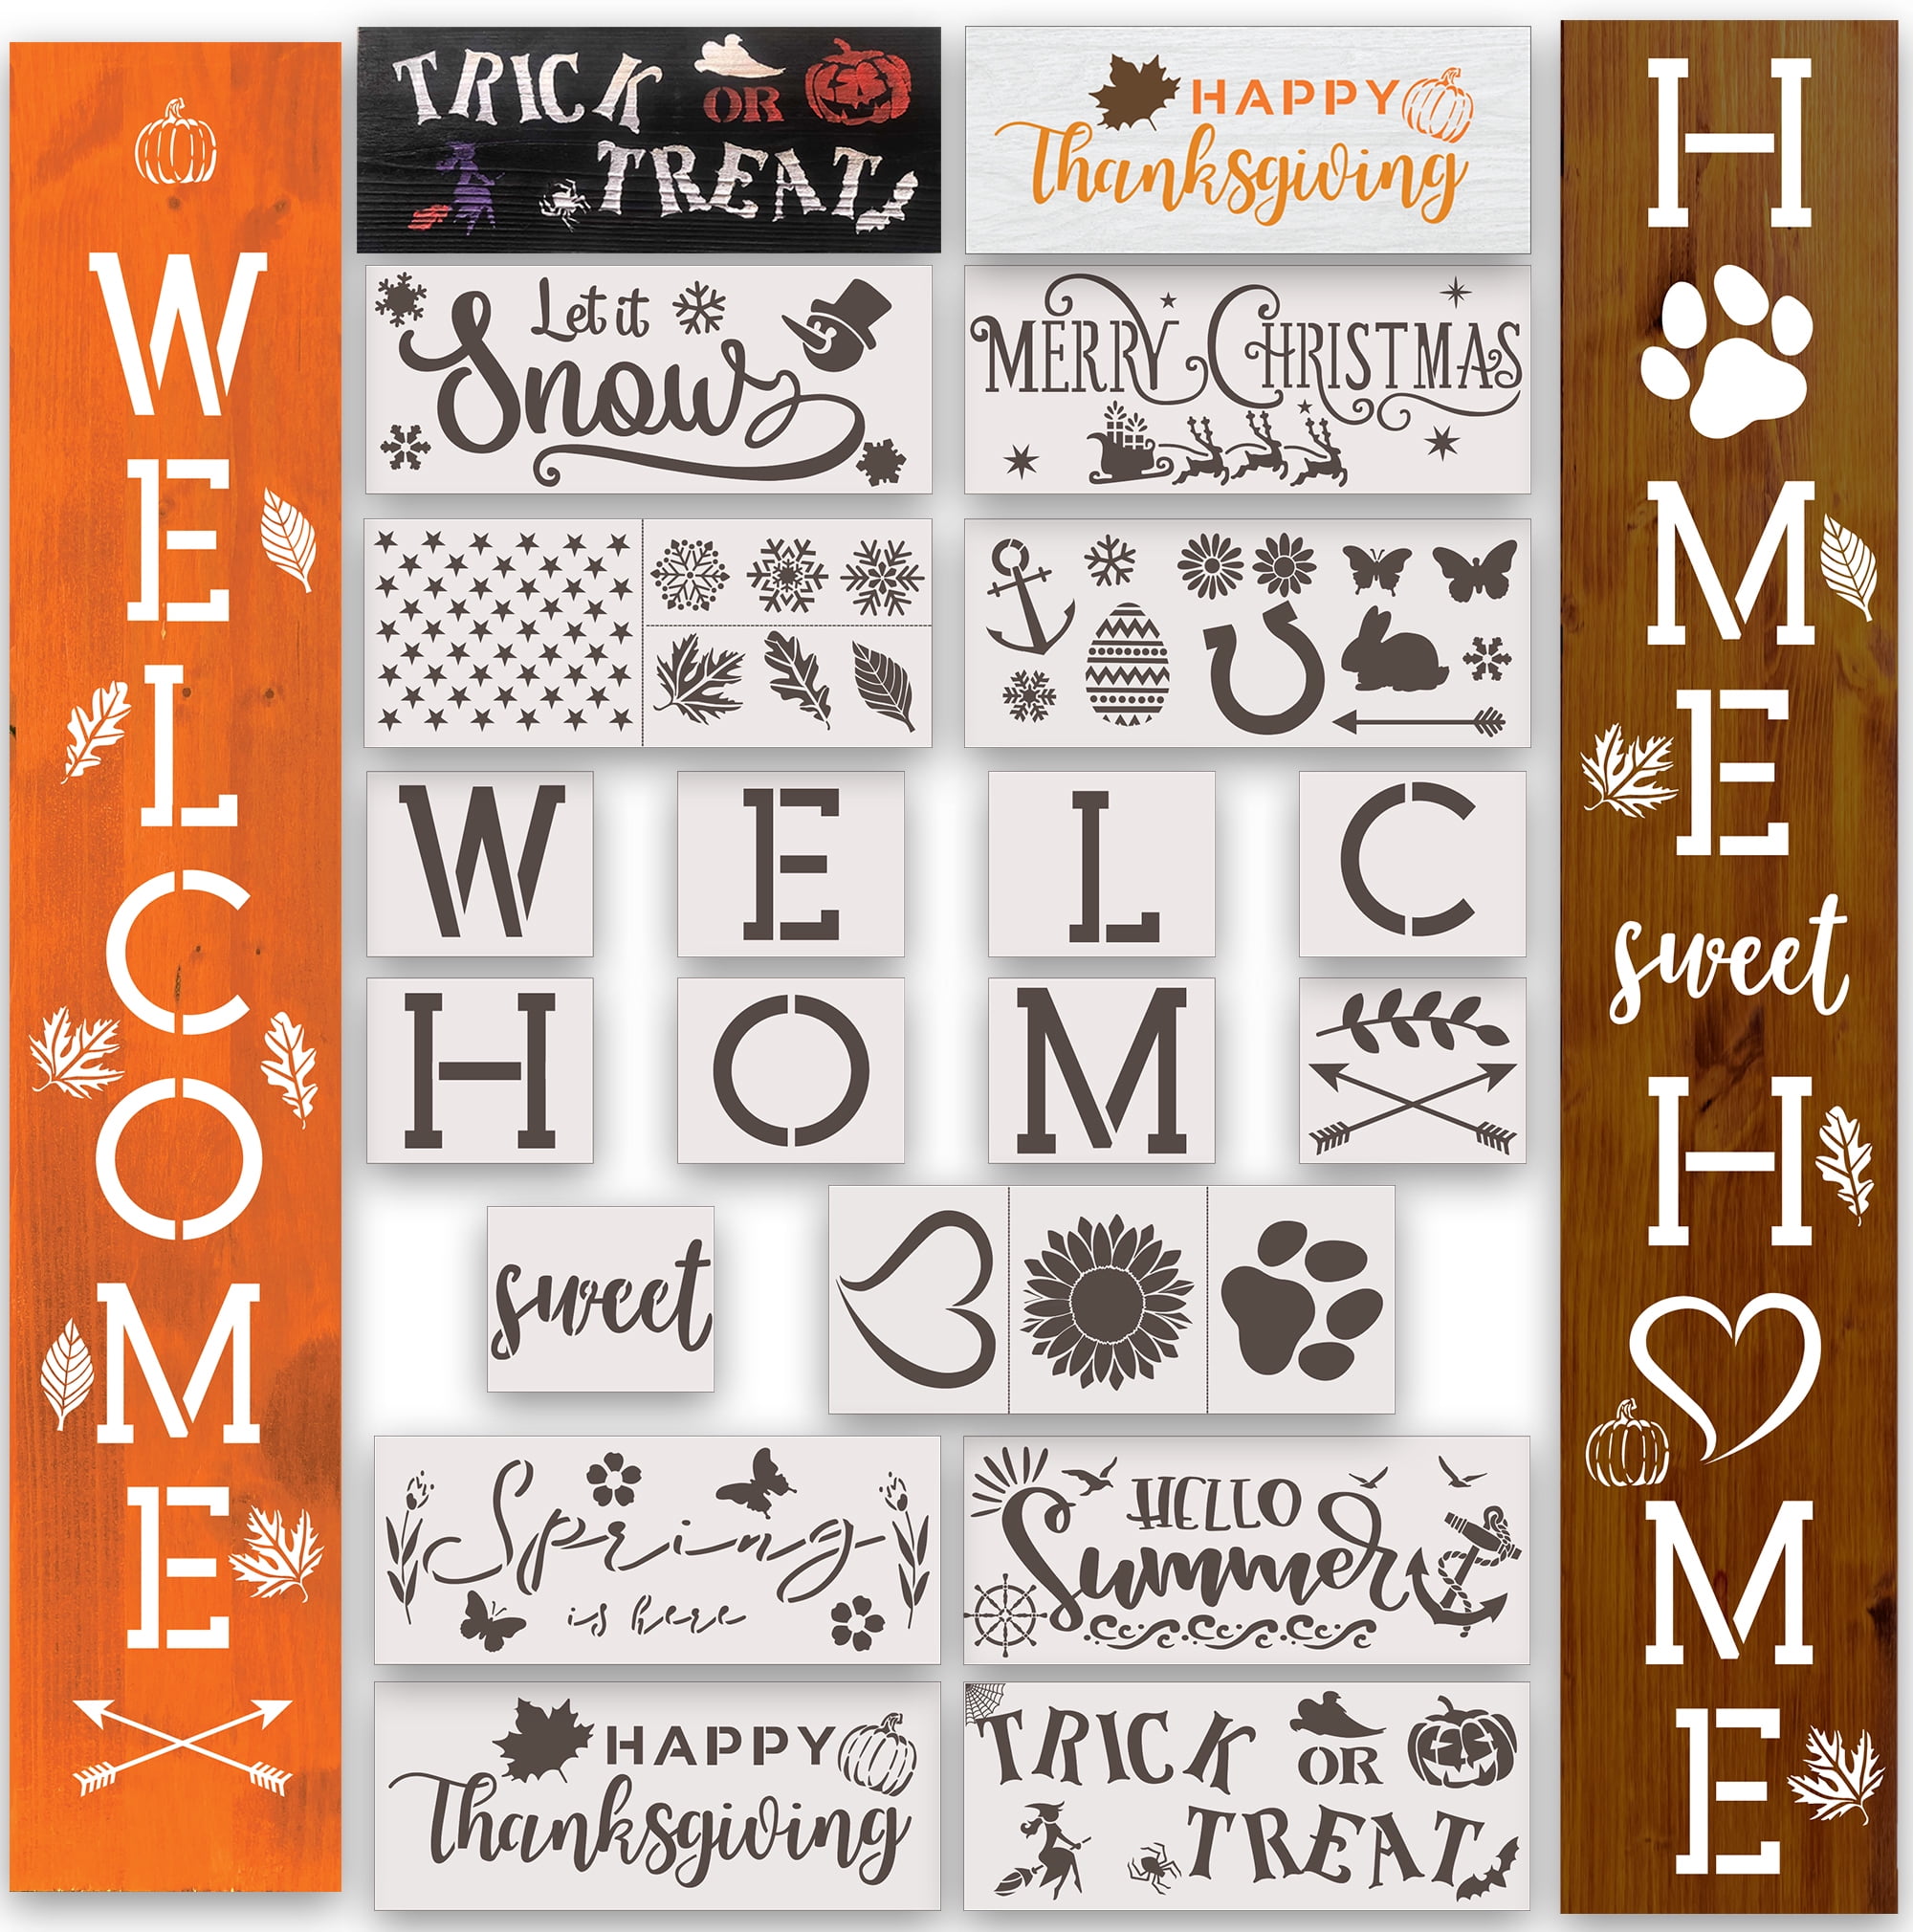 Welcome stencil n.4 - Reusable modular Welcome stencil for wood signs,  walls, fabrics for veterinary signs